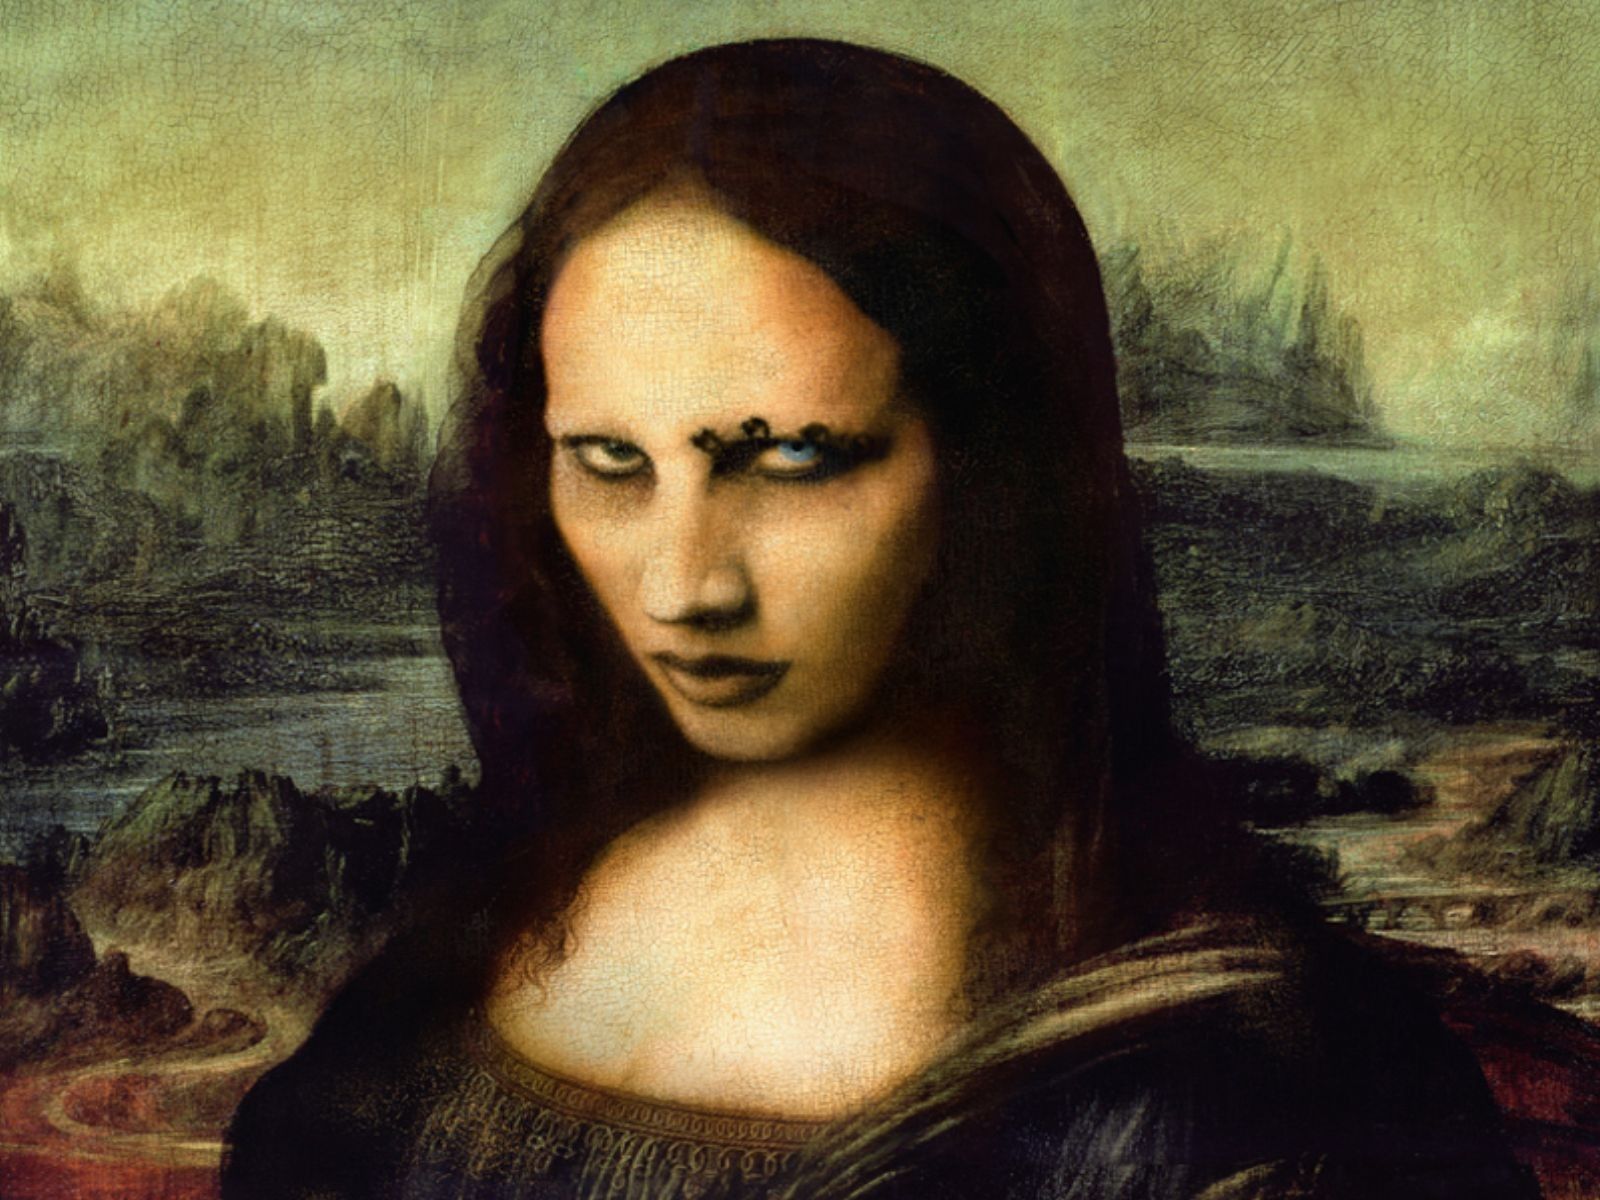  An image of the Mona Lisa with a goth makeover, showing the background landscape details of the original painting.